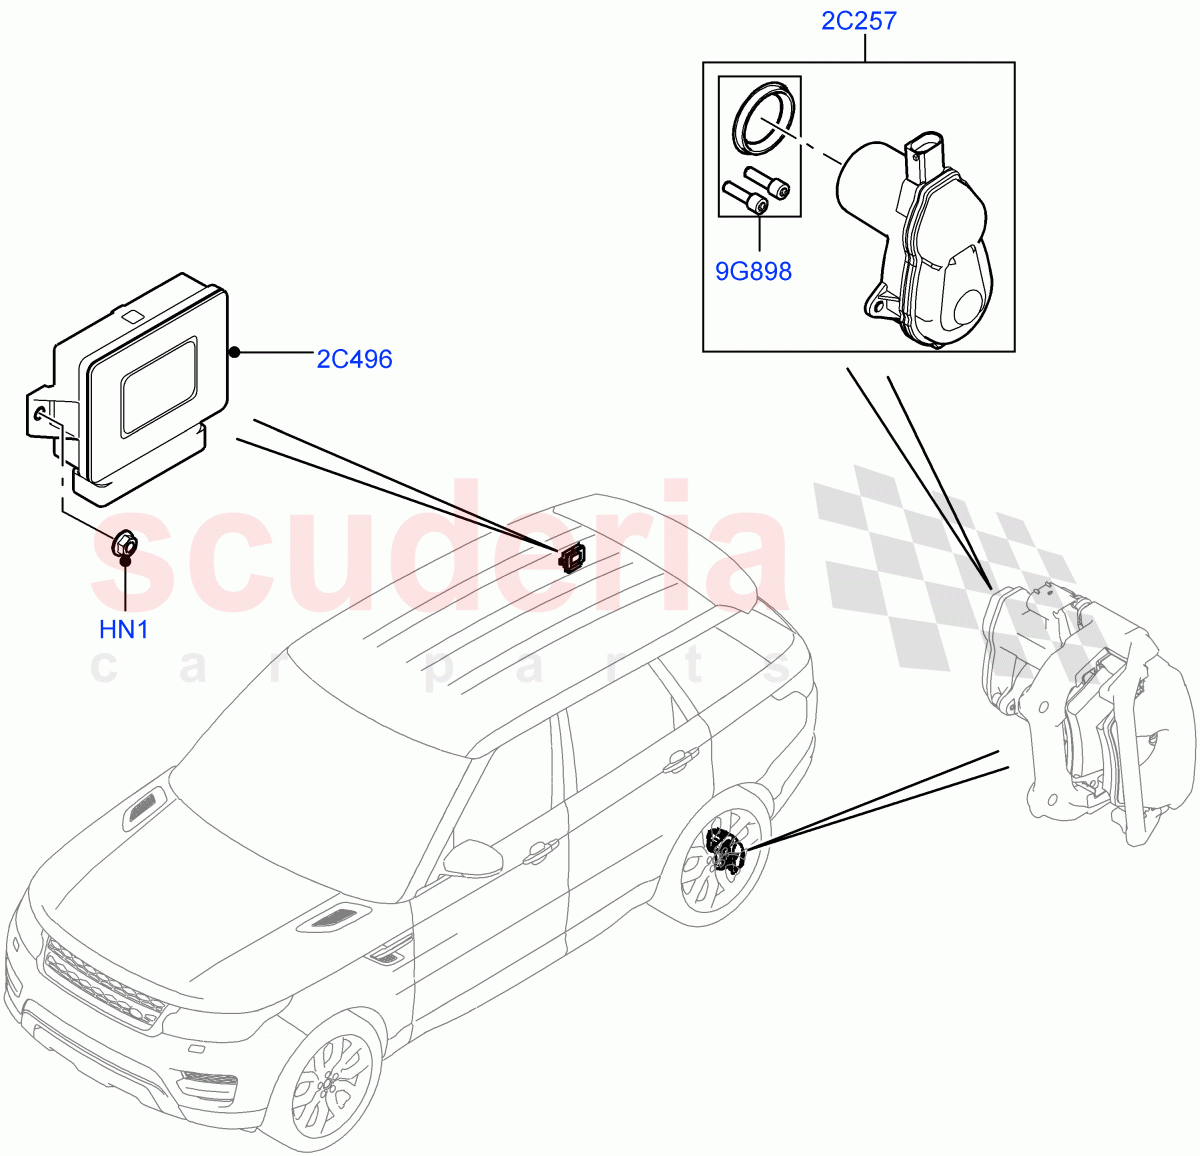 Parking Brake(Electric Parking Brake Actuator And Cables) of Land Rover Land Rover Range Rover Sport (2014+) [2.0 Turbo Petrol GTDI]